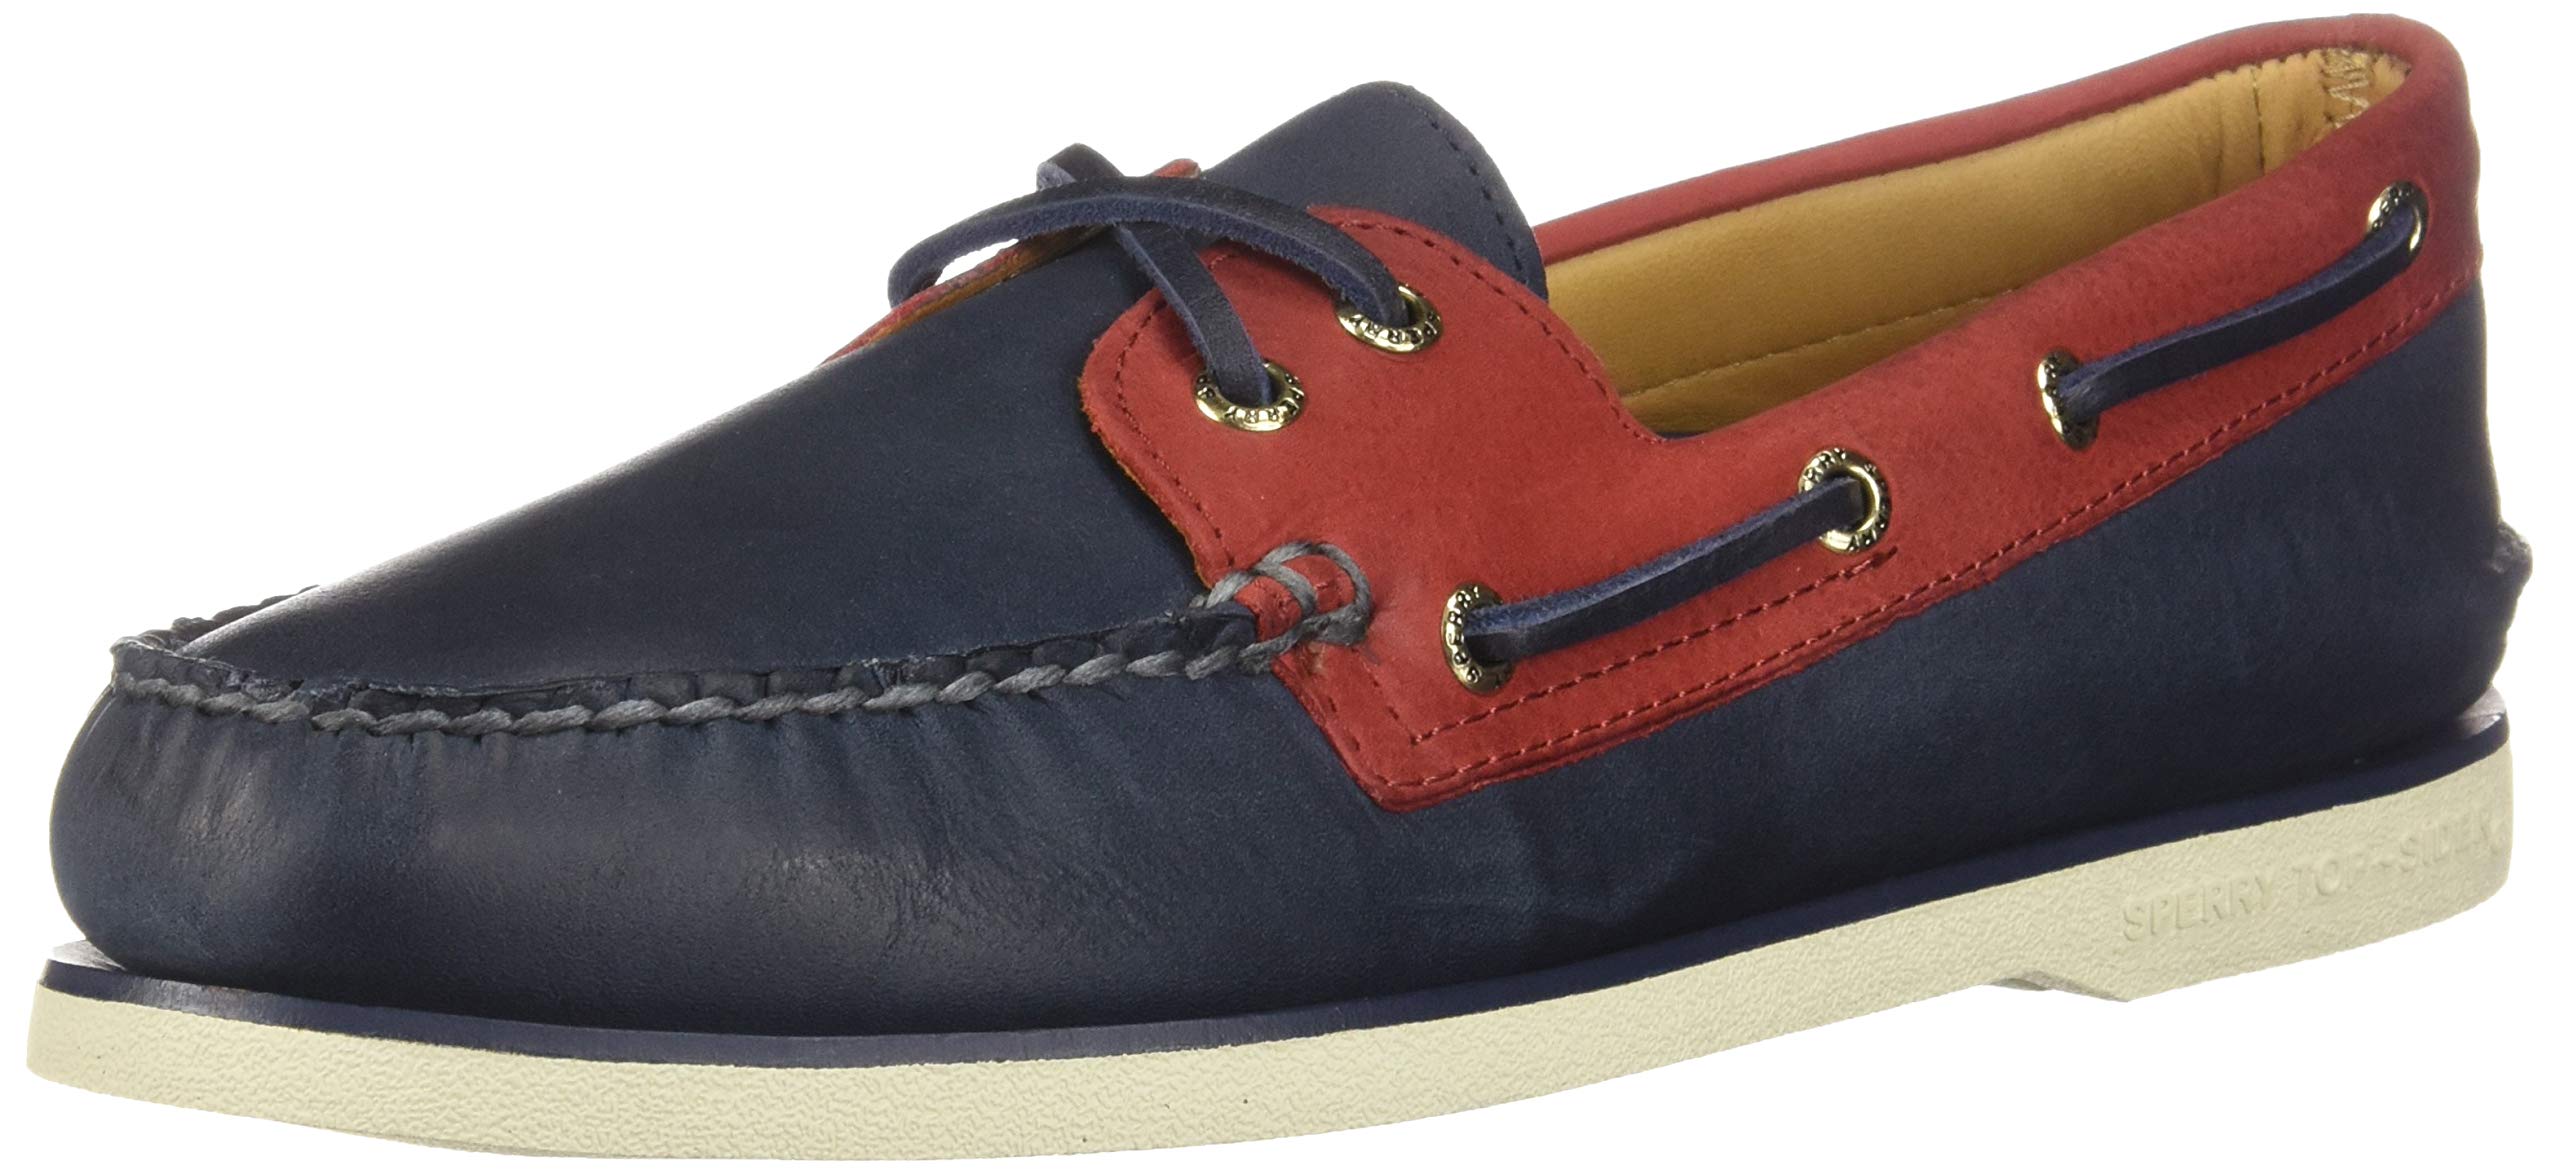 Sperry Mens Gold Cup Authentic Original Chevre Boat Shoe 9.5 Navy/Red